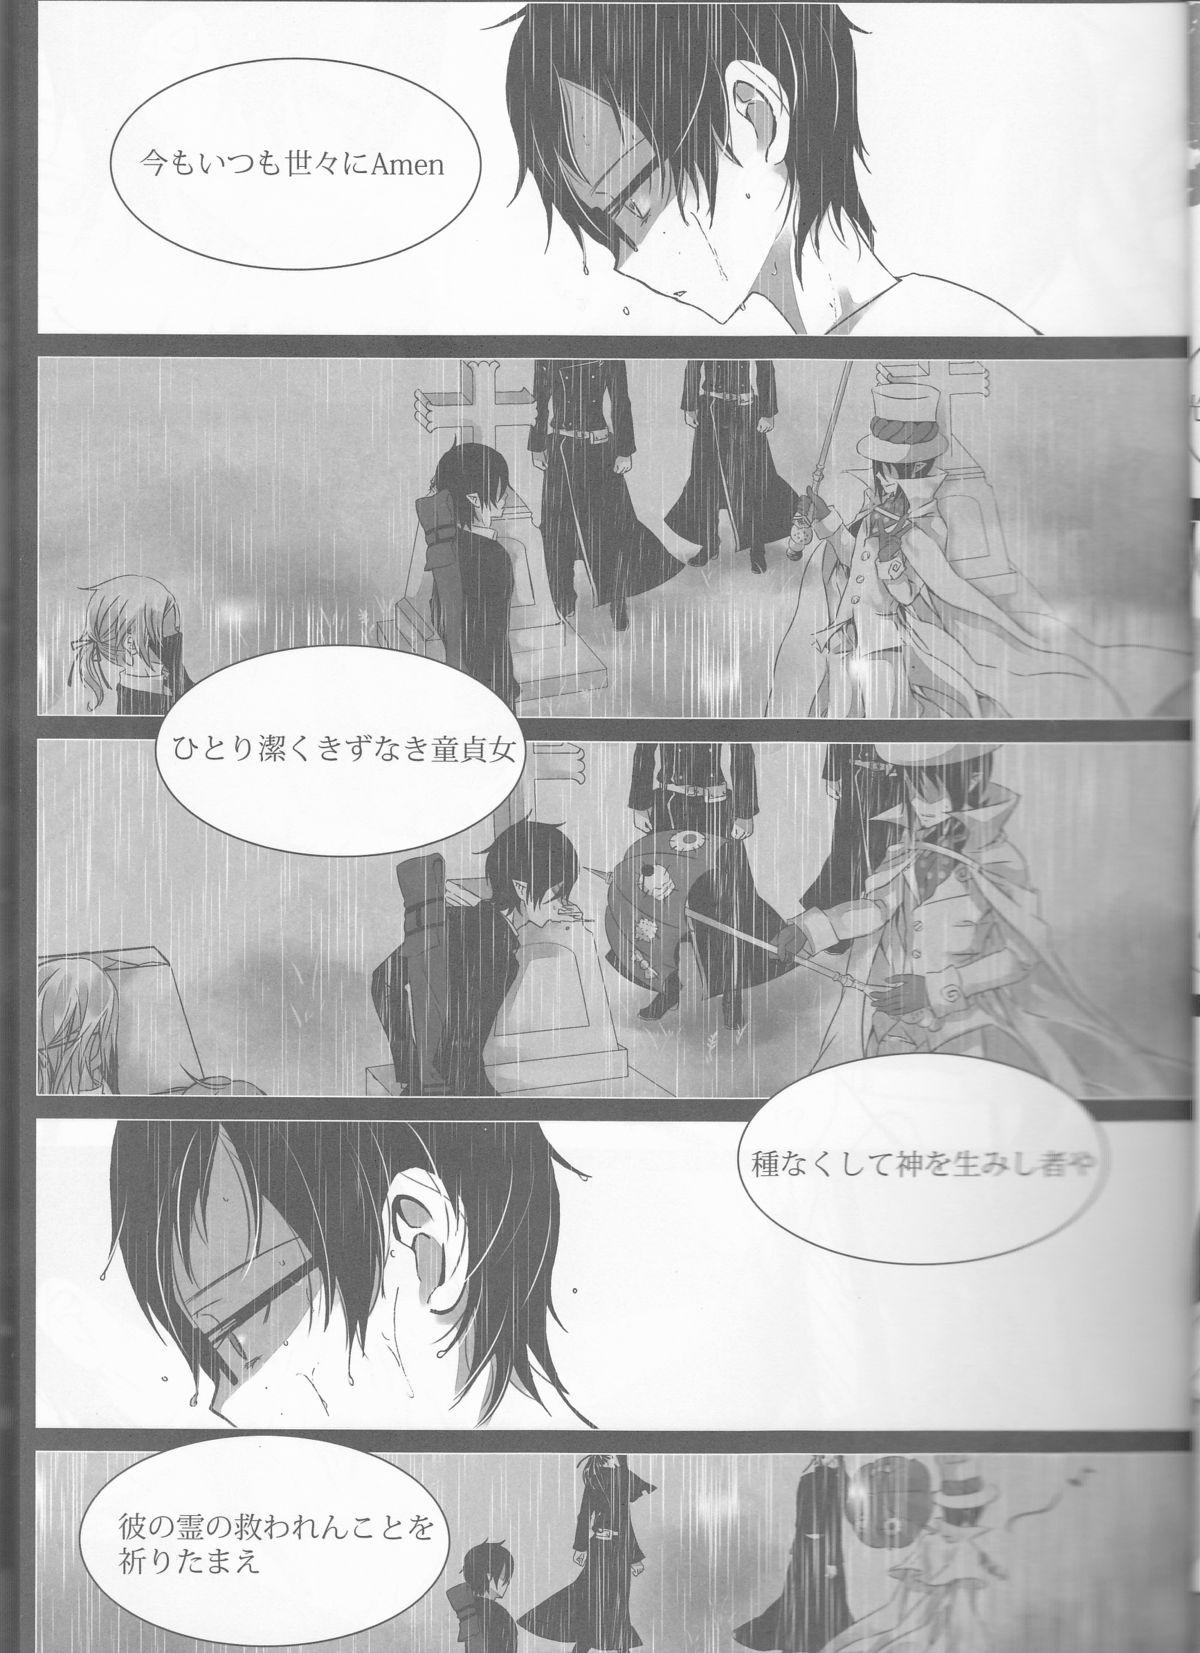 4some Exodus 2 - Ao no exorcist Stud - Page 8